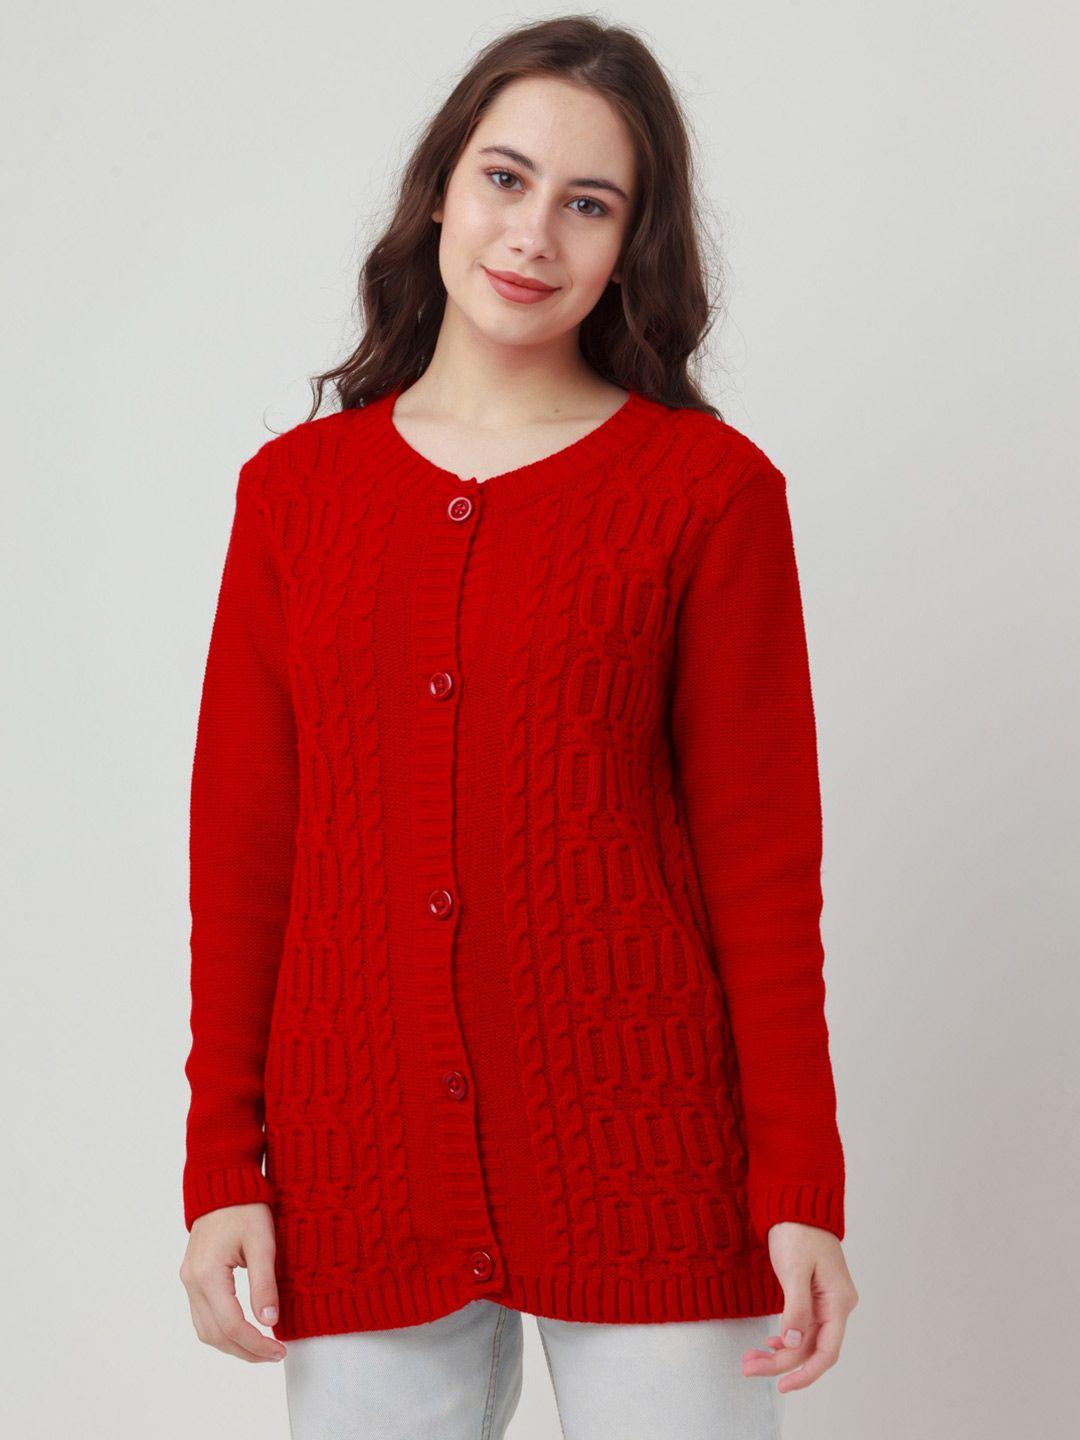 zink-london-women-red-cable-knit-acrylic-cardigan